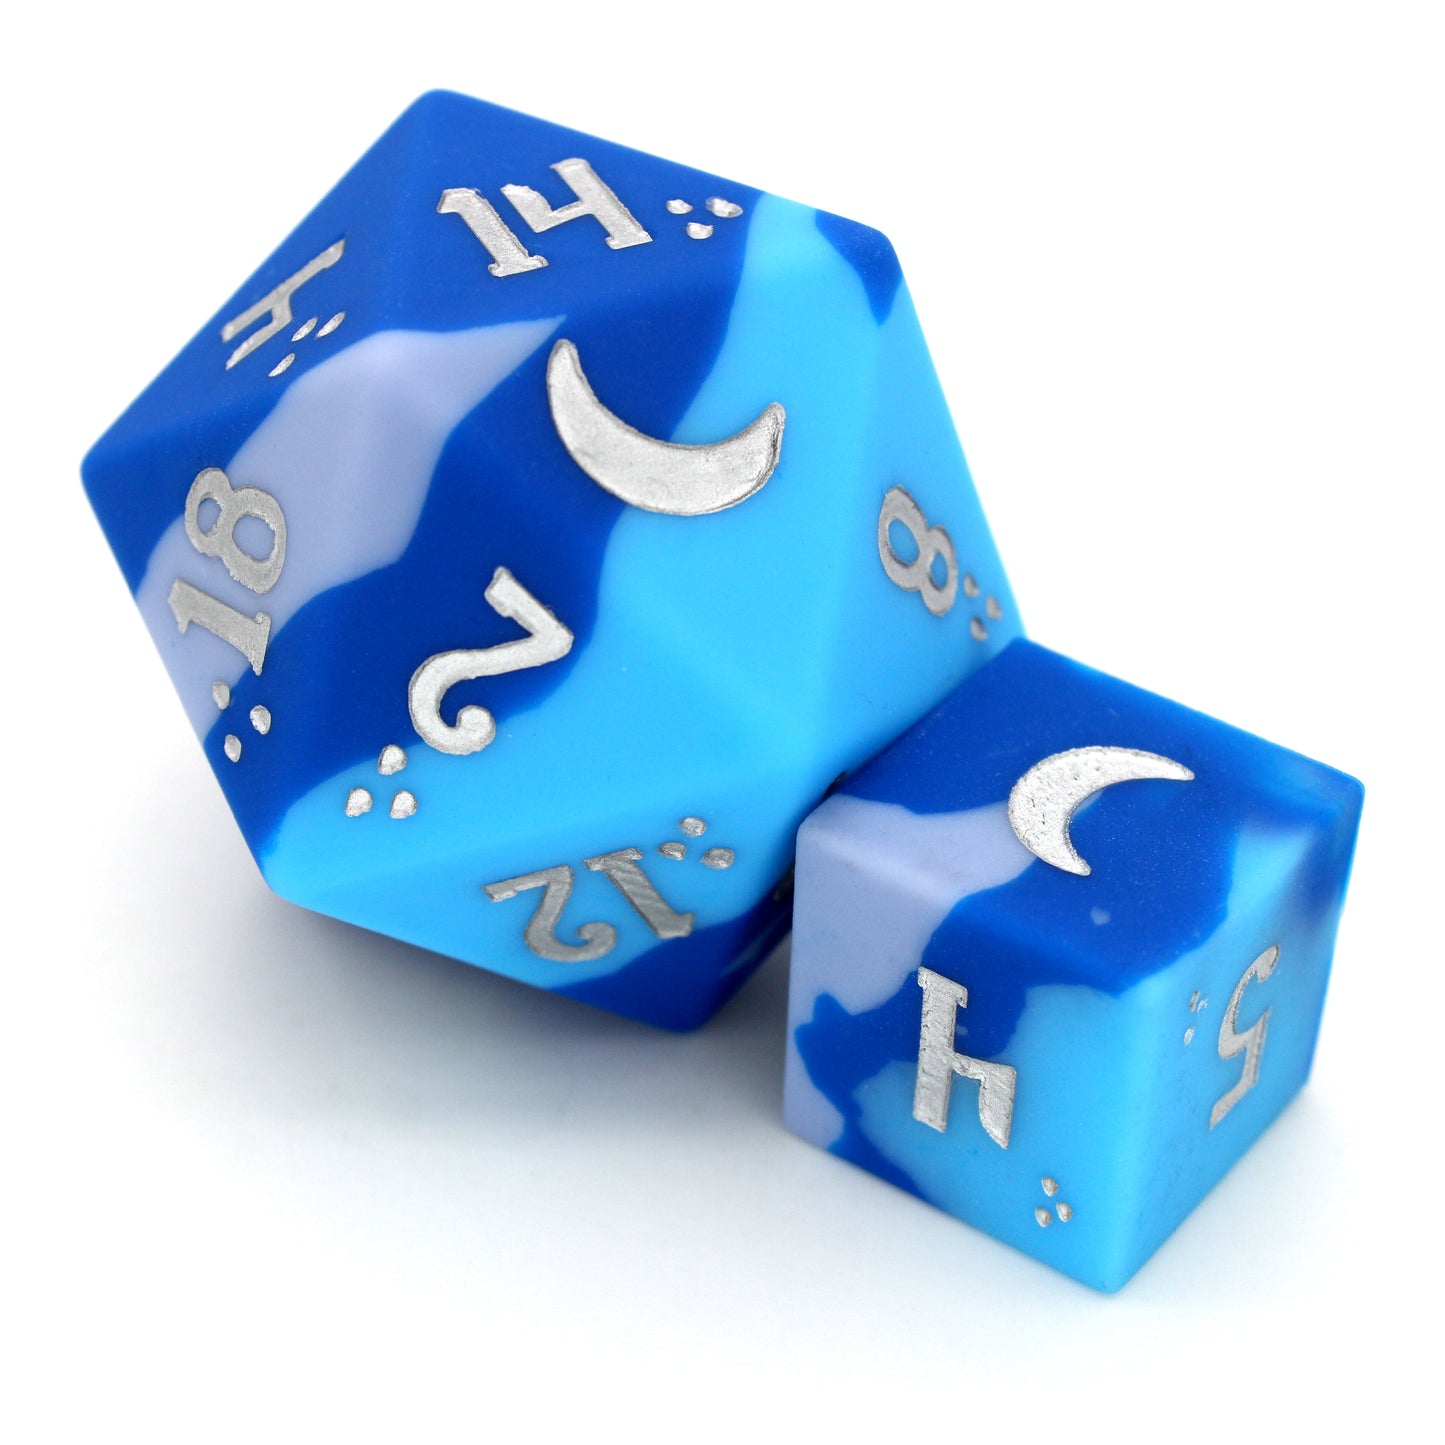 Chaotic Neutral is an 8-piece, swirled silicone dice set in bright blues and greys. It features a moonlit silver ink design.